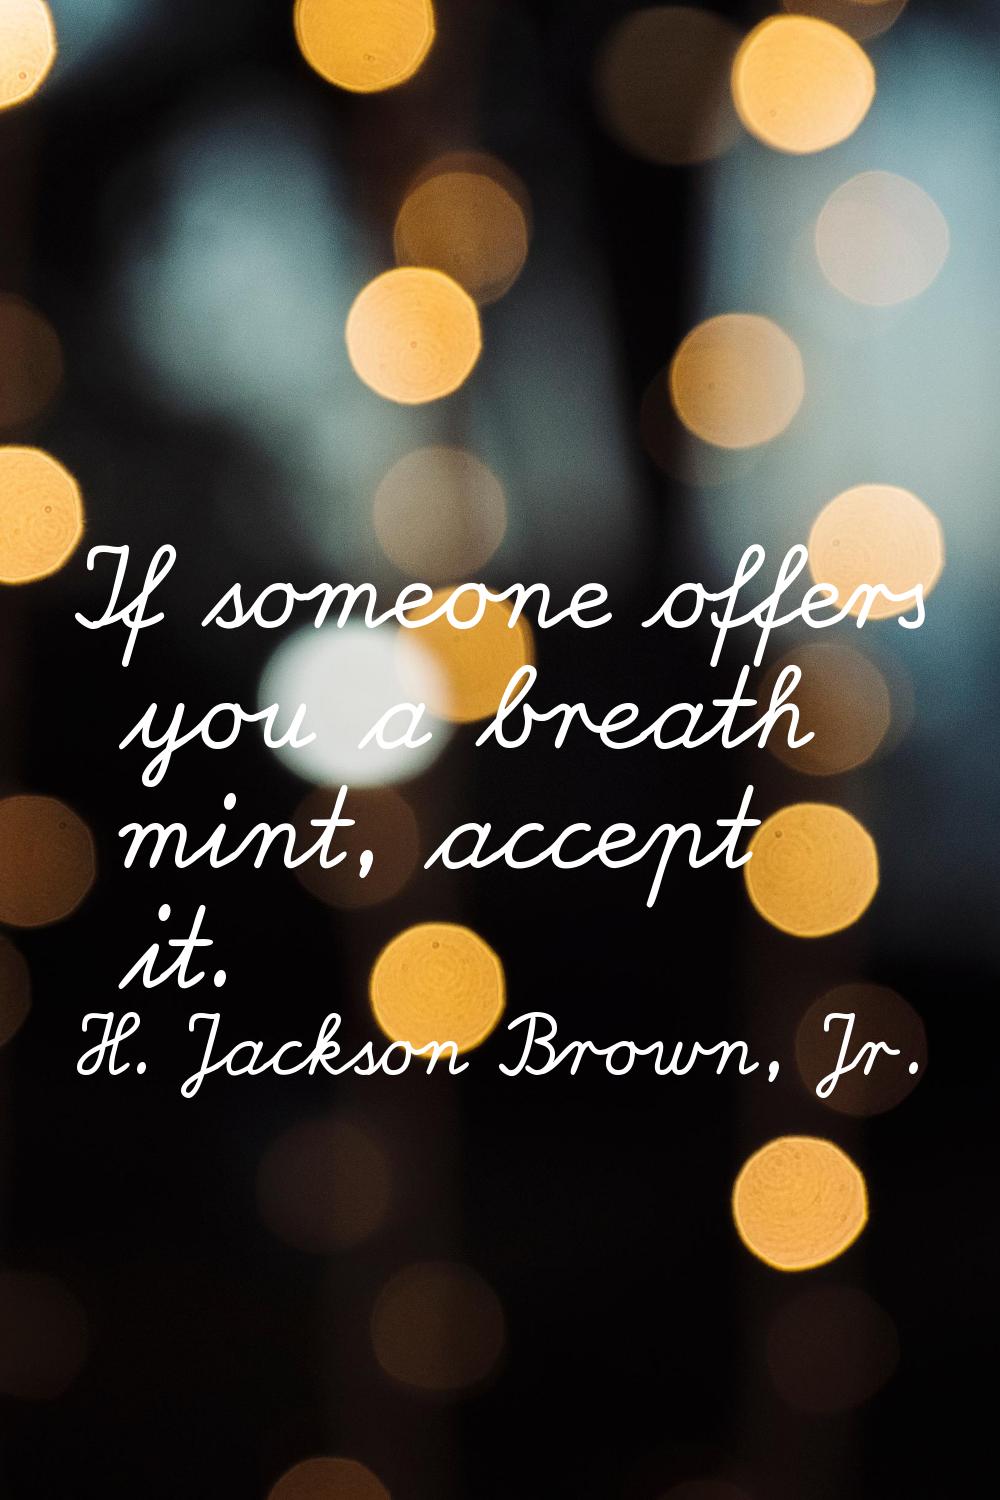 If someone offers you a breath mint, accept it.